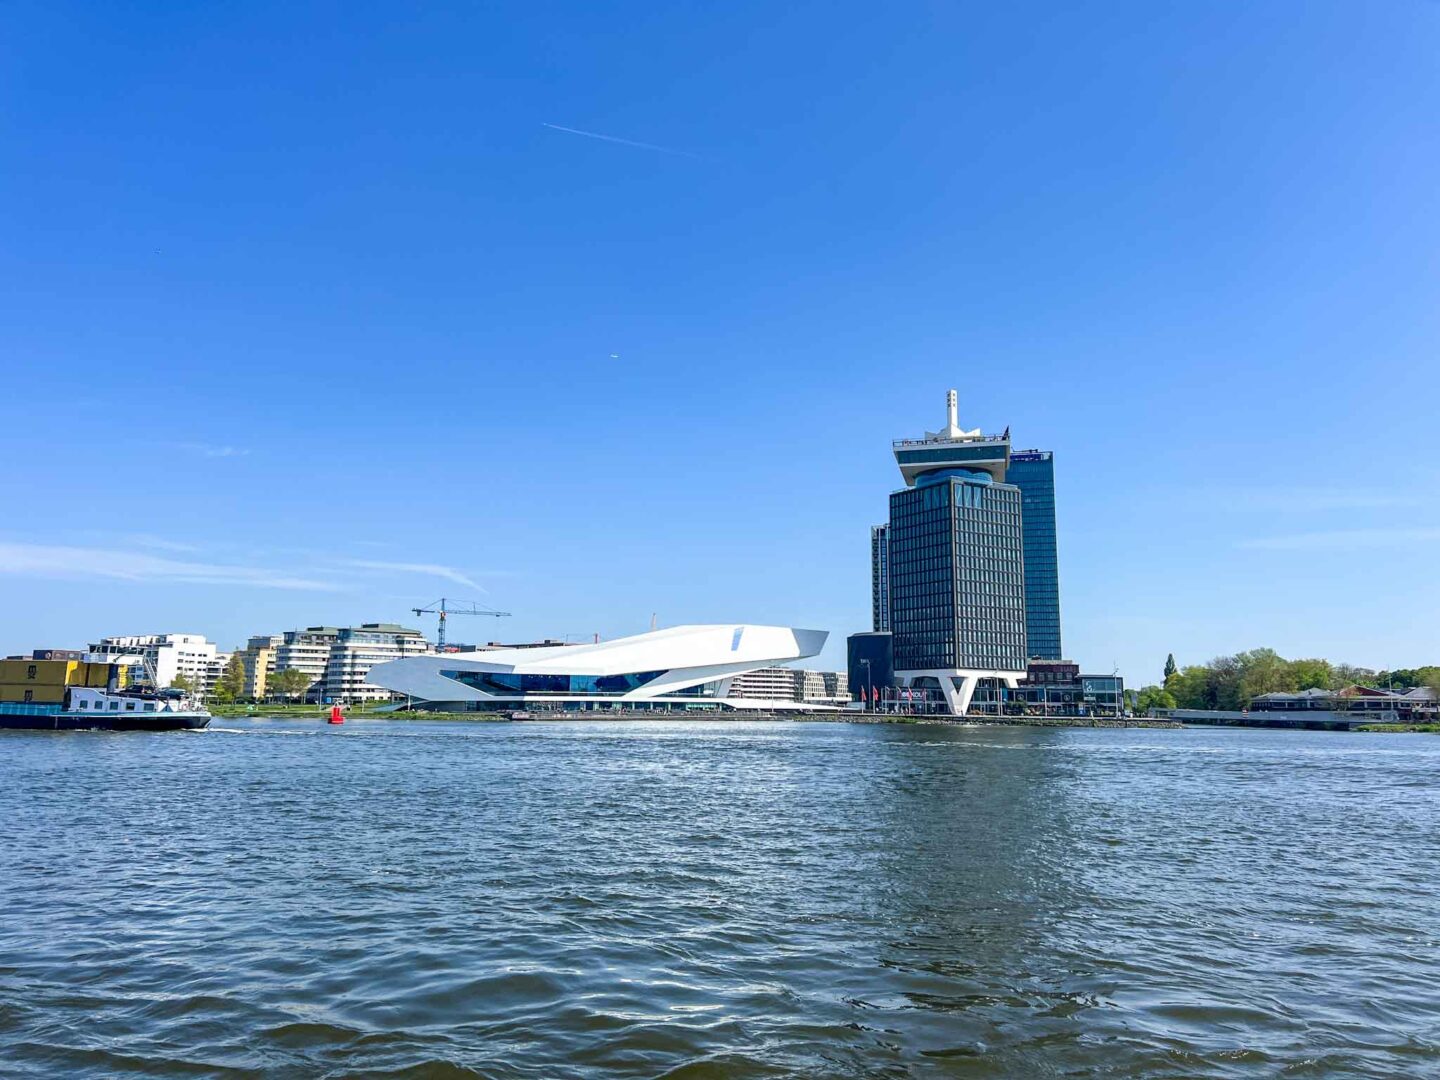 Things to do in Amsterdam Noord, view of the eye filmmuseum and A'DAM lookout tower from the River 